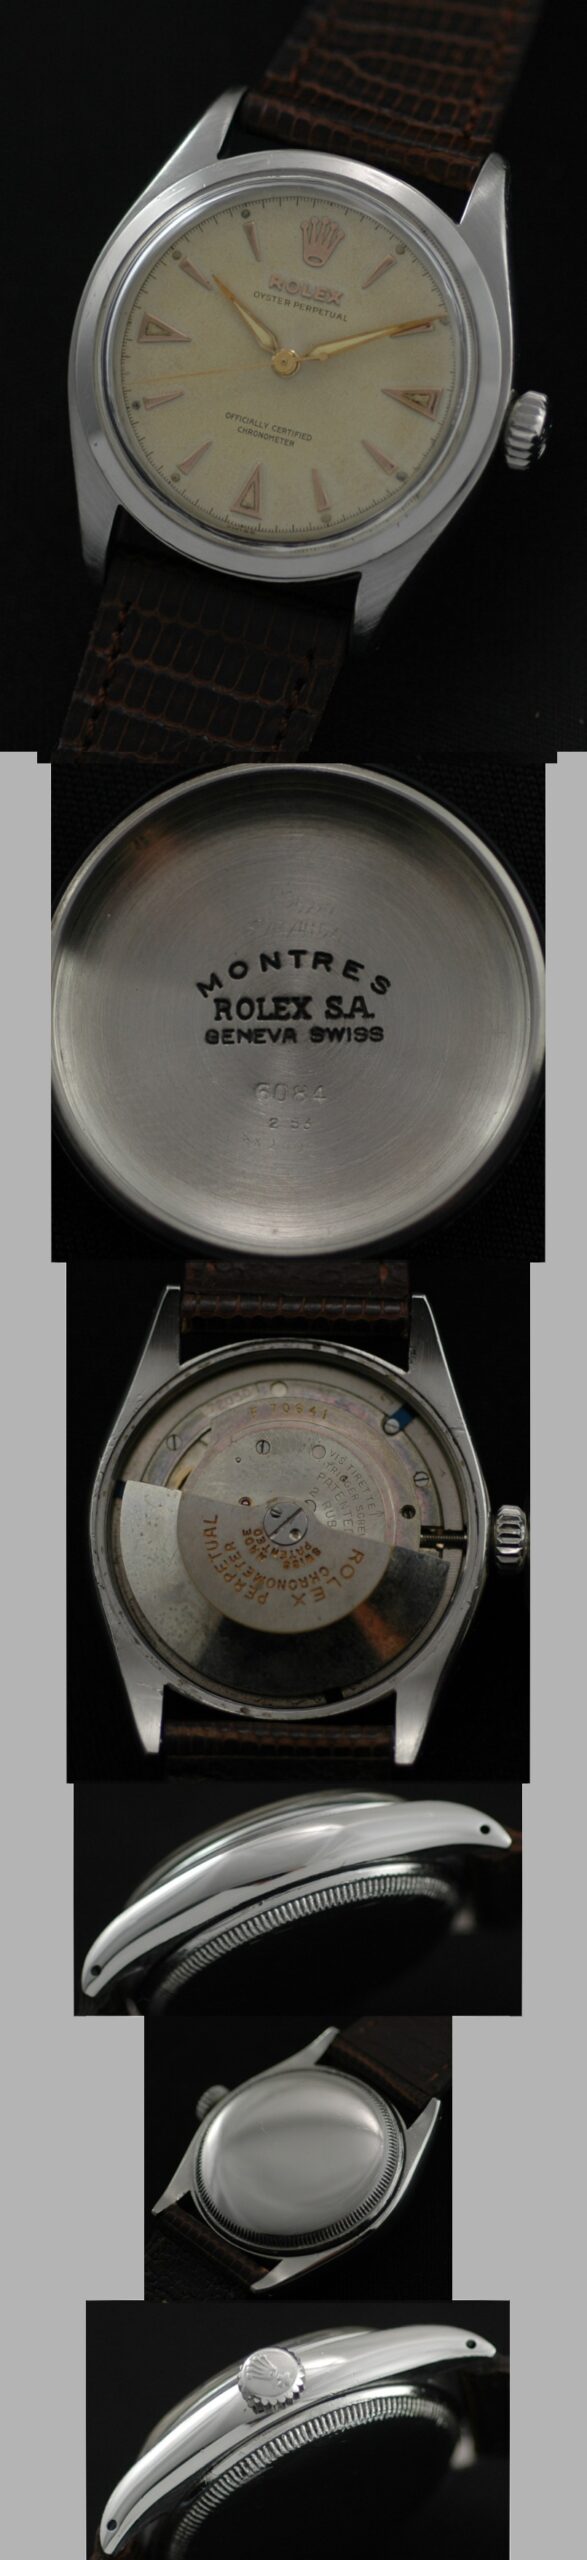 1953 Rolex Oyster Perpetual stainless steel watch with original Brevet winding crown, dial, case, and cleaned semi-bubbleback movement.